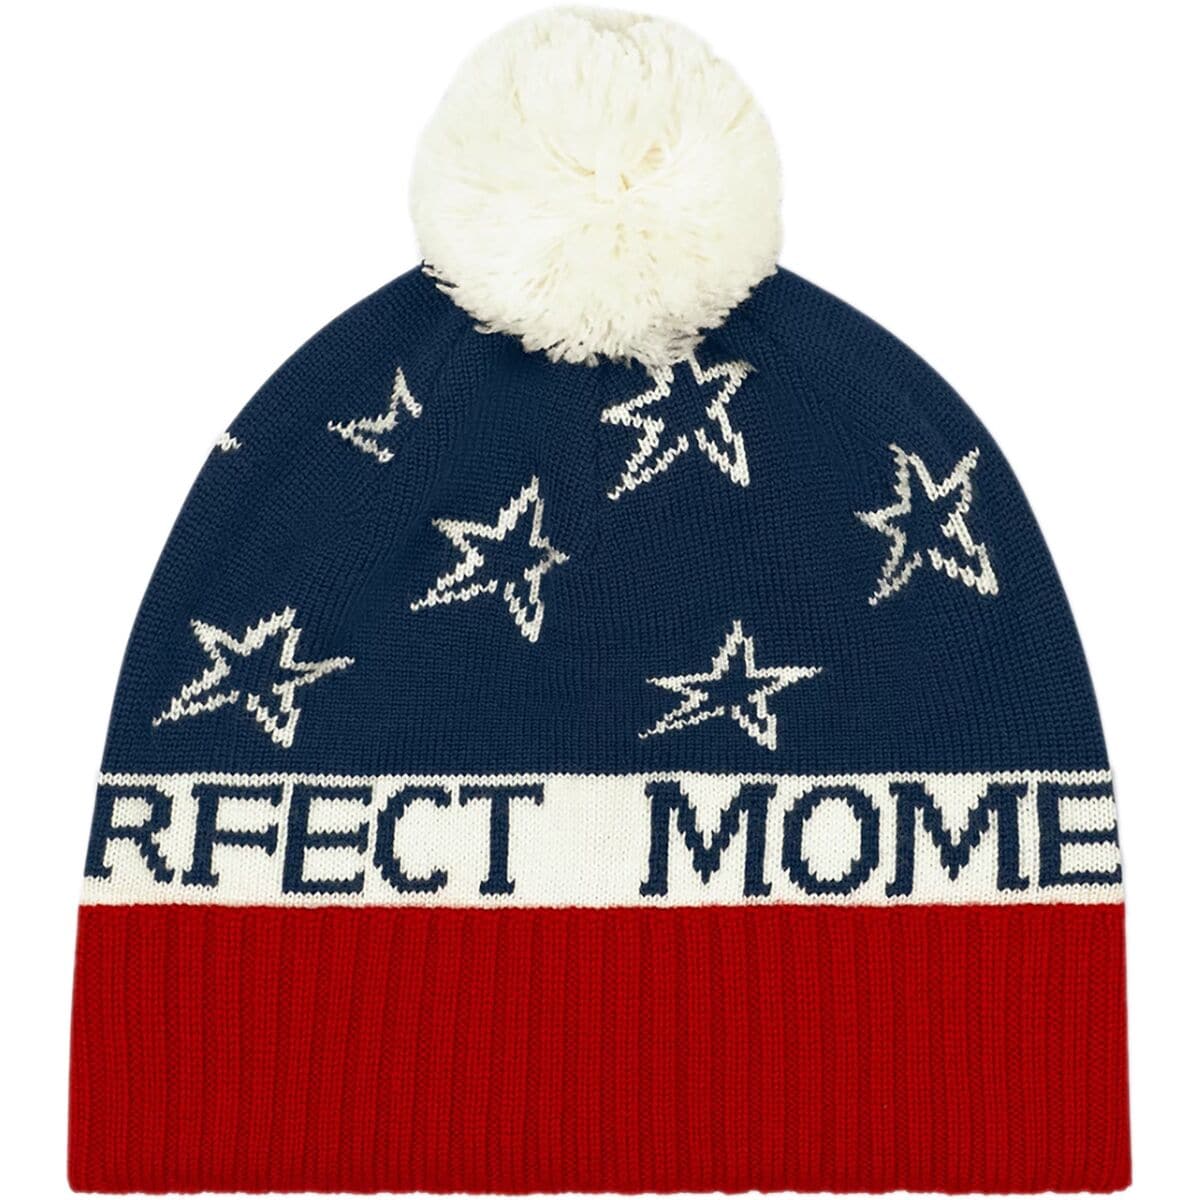 Perfect Moment PM Star Beanie